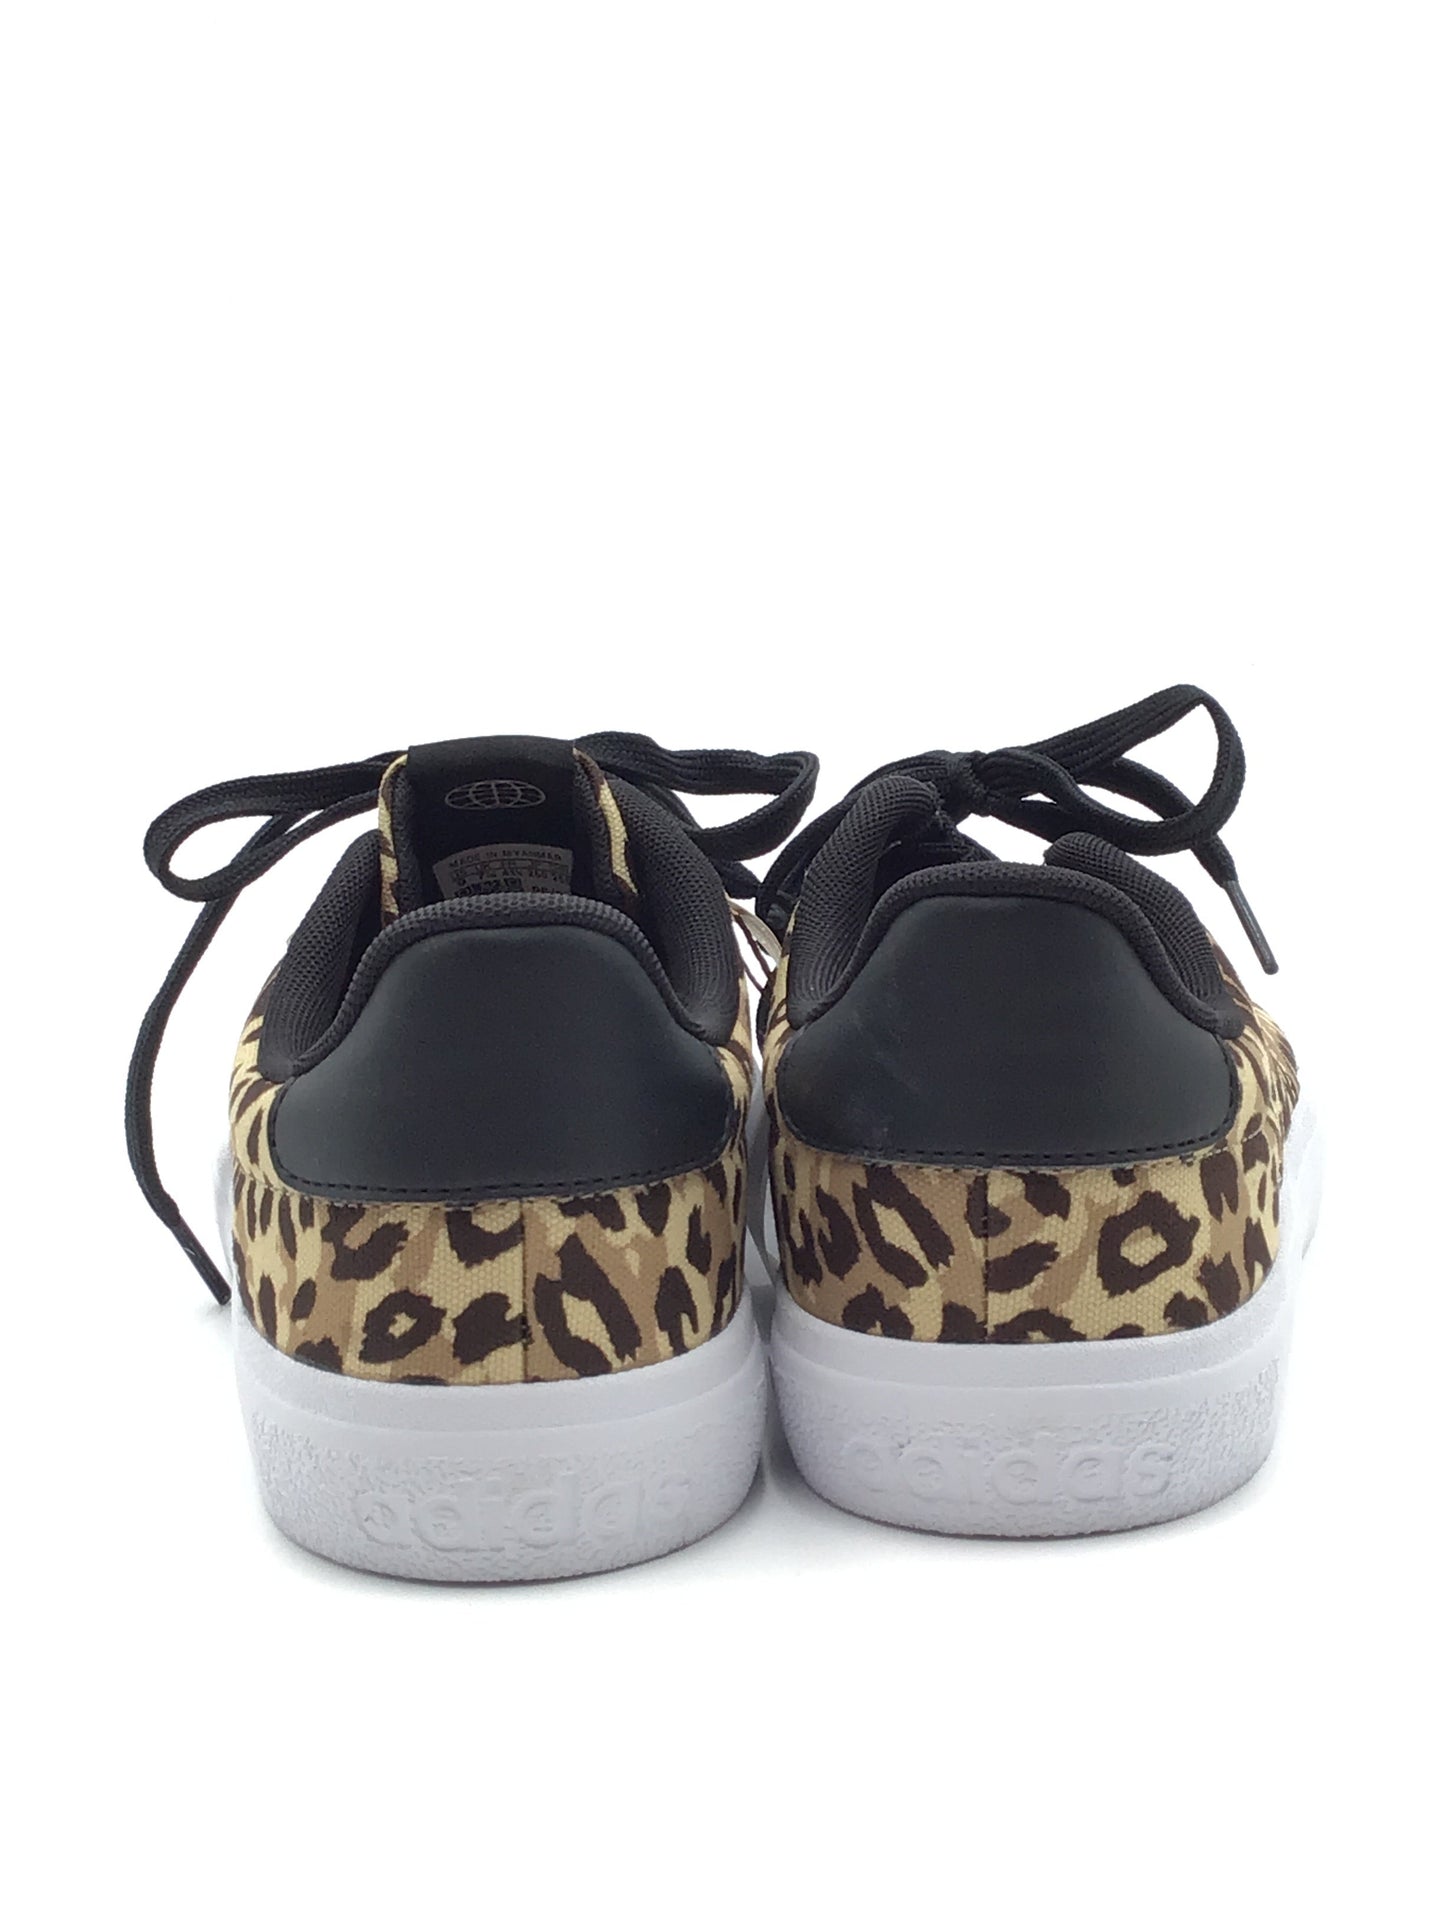 Animal Print Shoes Sneakers Adidas, Size 9